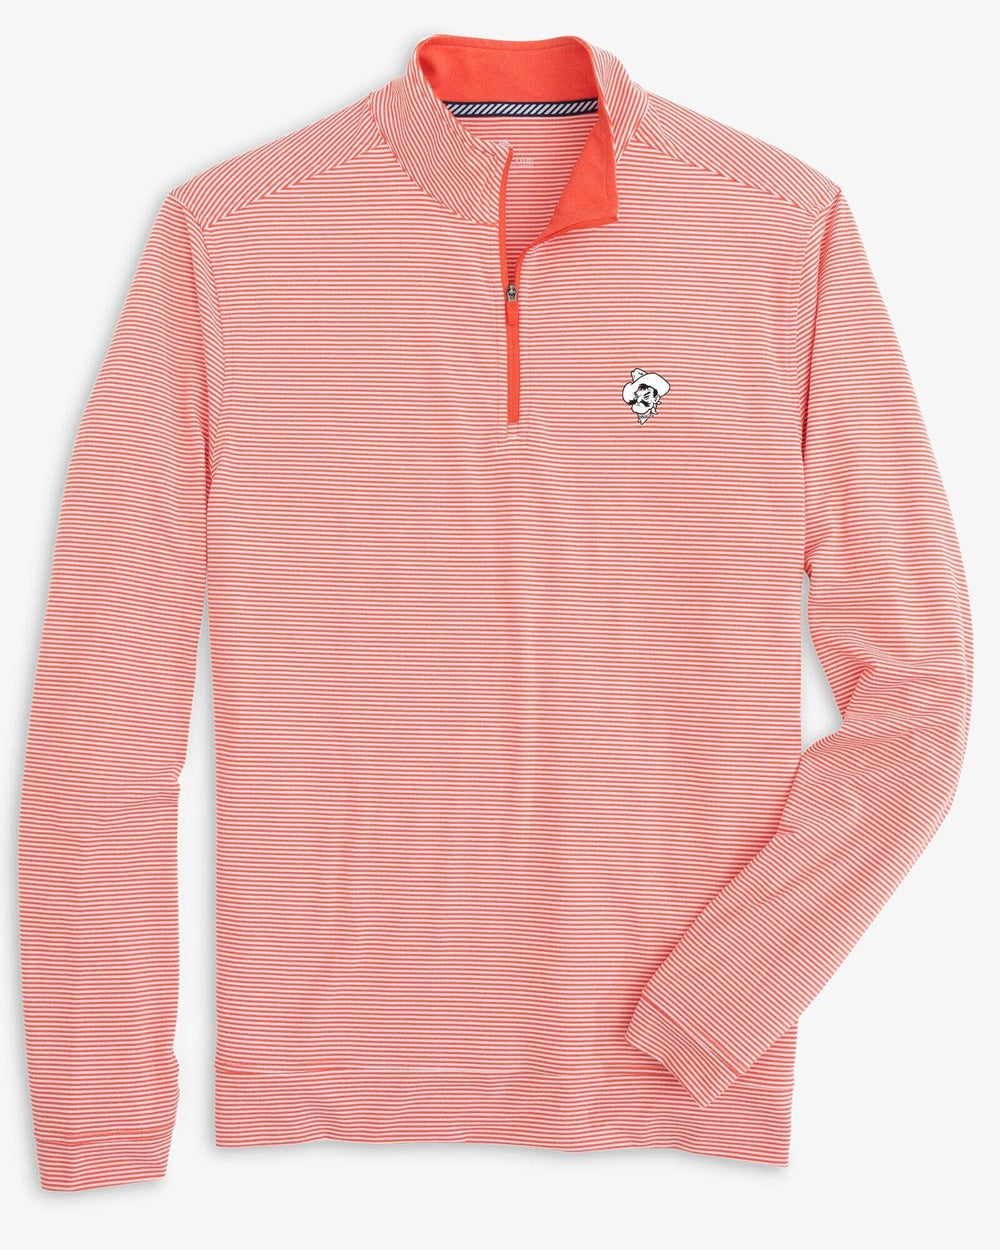 The front view of the Oklahoma State Cowboys Cruiser Micro-Stripe Heather Quarter Zip by Southern Tide - Heather Endzone Orange